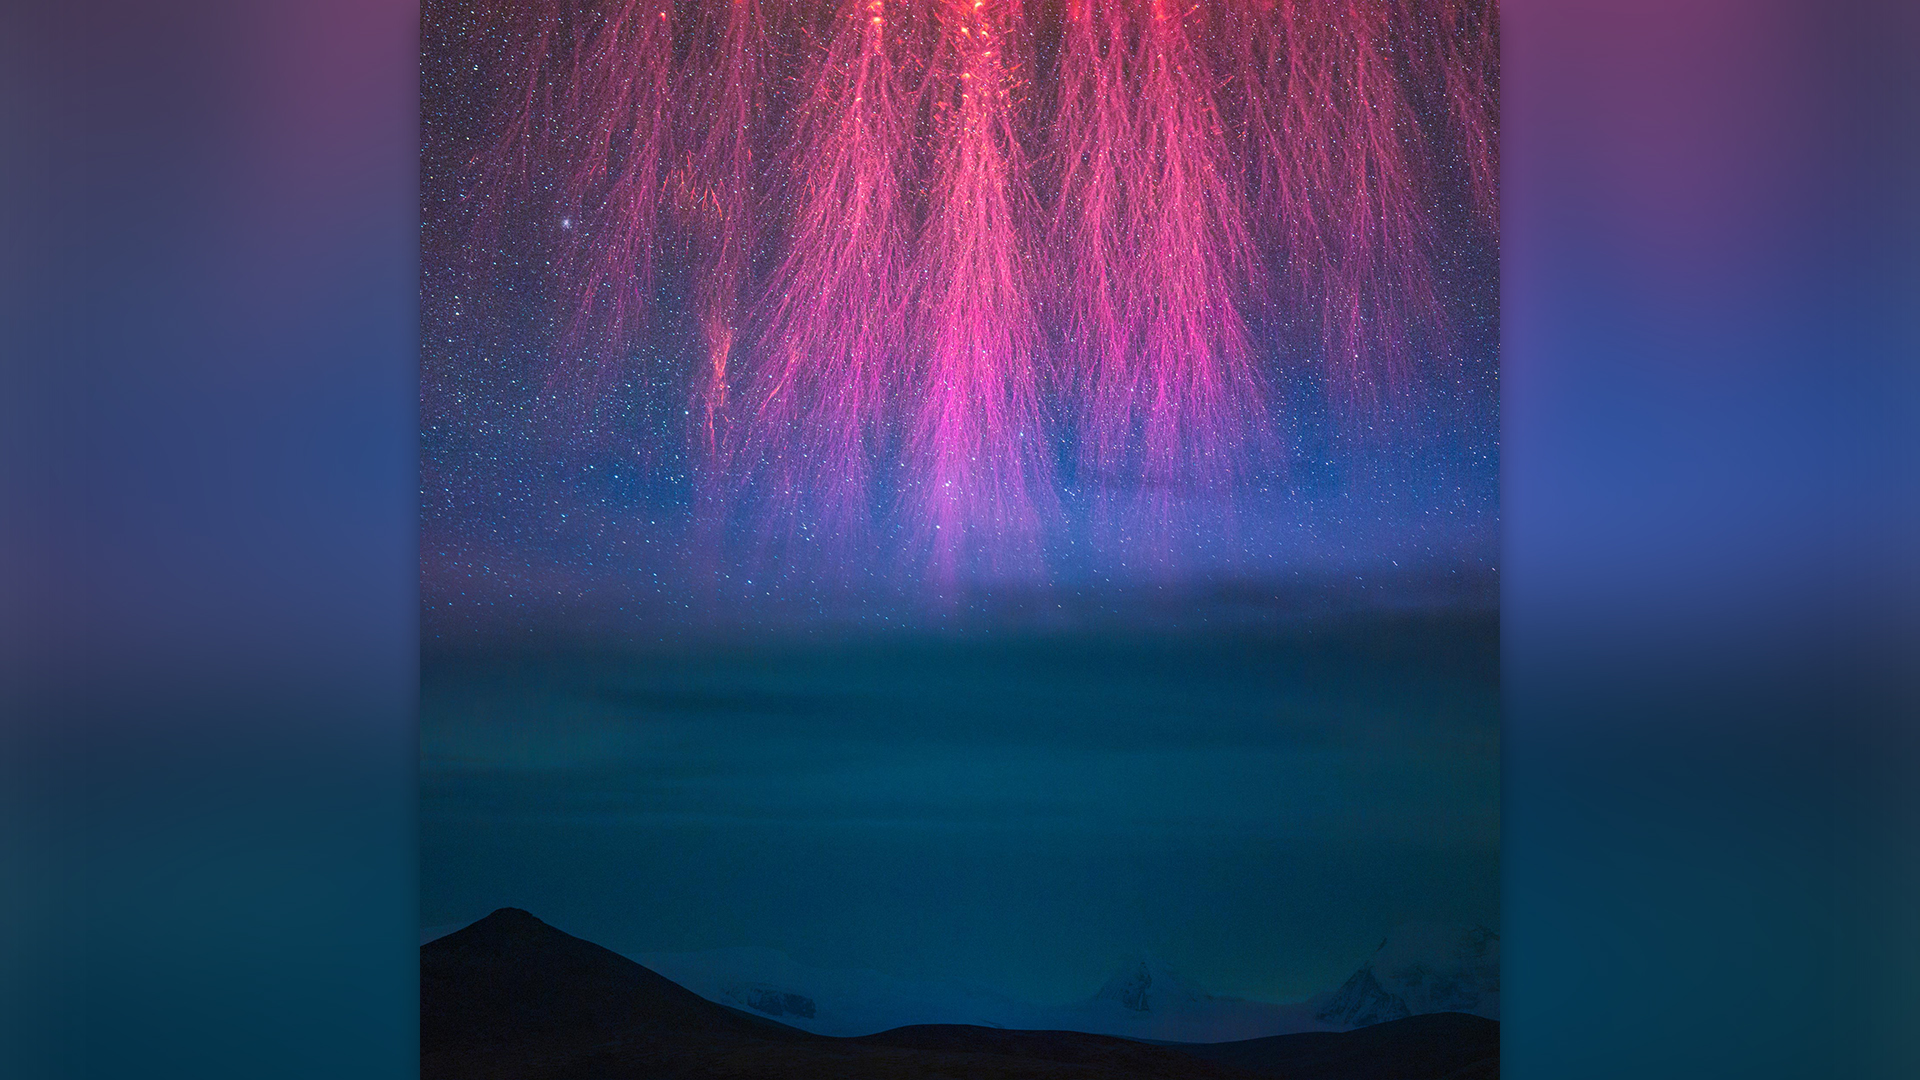 Pink sprite flashes over the Himalayan mountains.